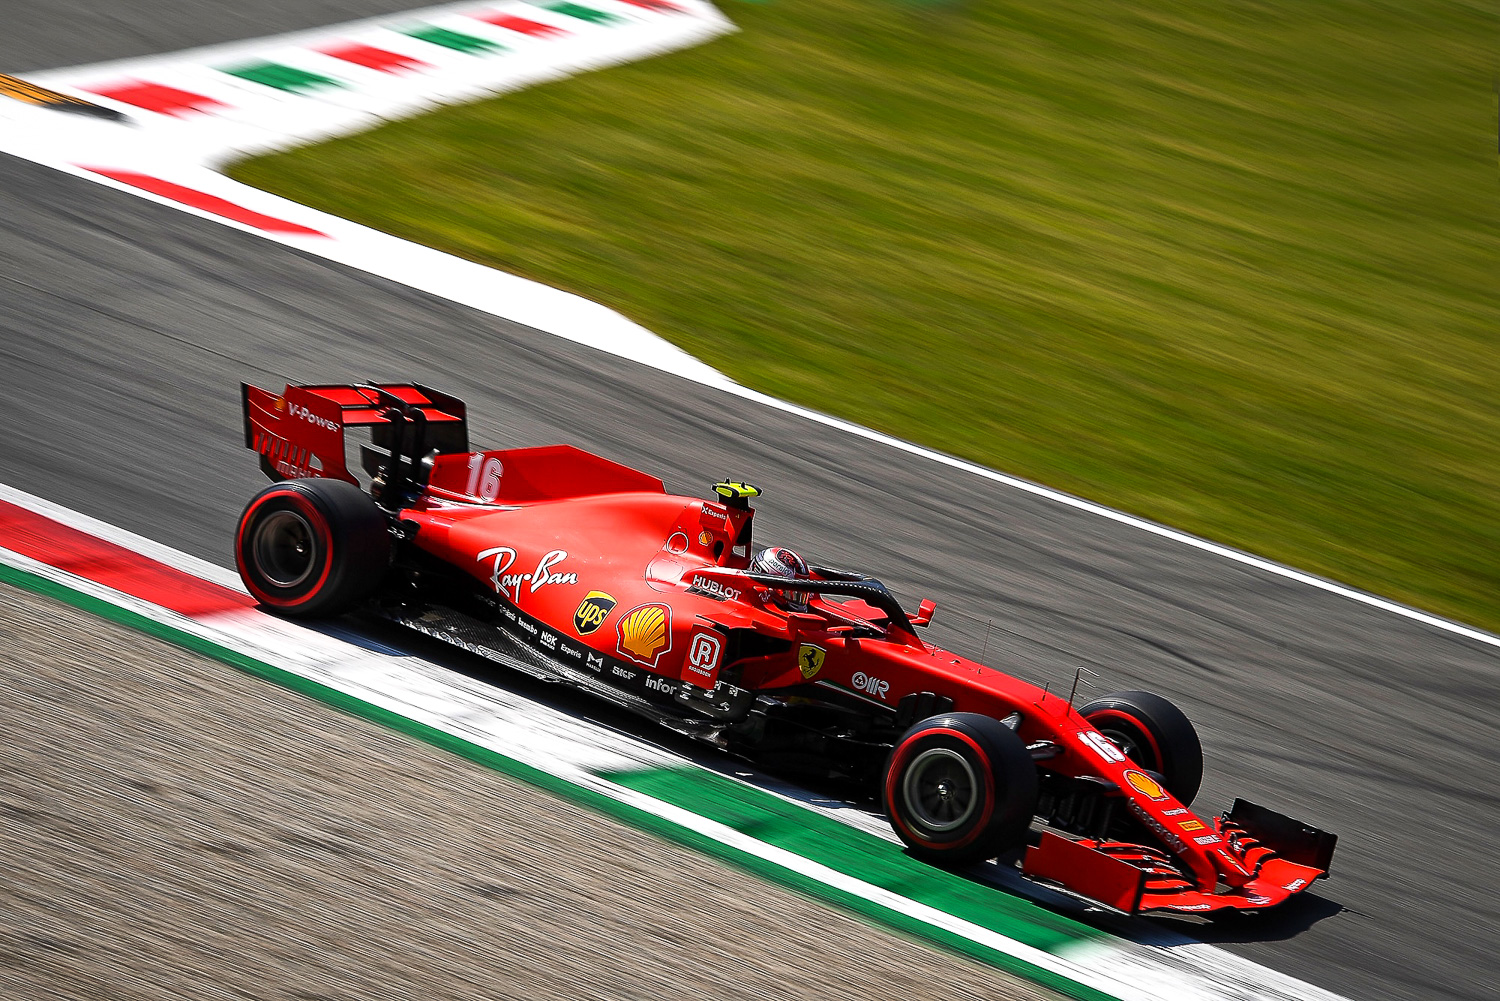 06/09/20 – Monza – Italy Grand Prix - Charles Leclerc